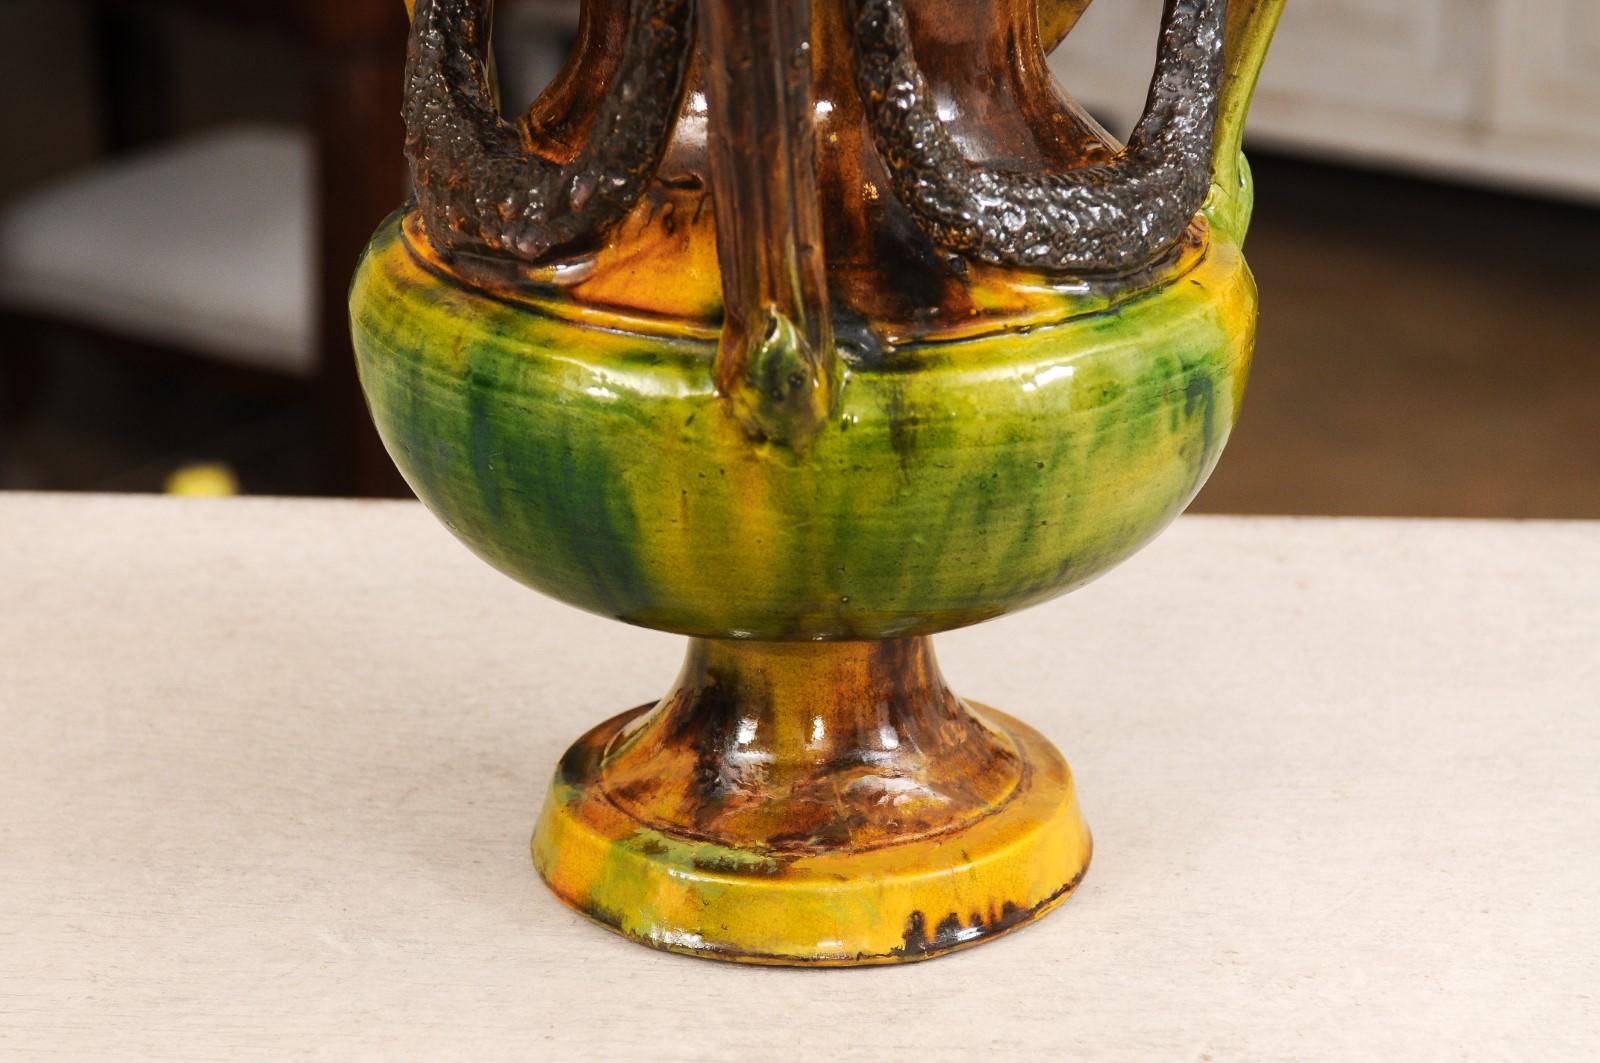 French Classical 19th Century Anduze Multi-Colored Glazed Vase with Swag Motifs For Sale 7